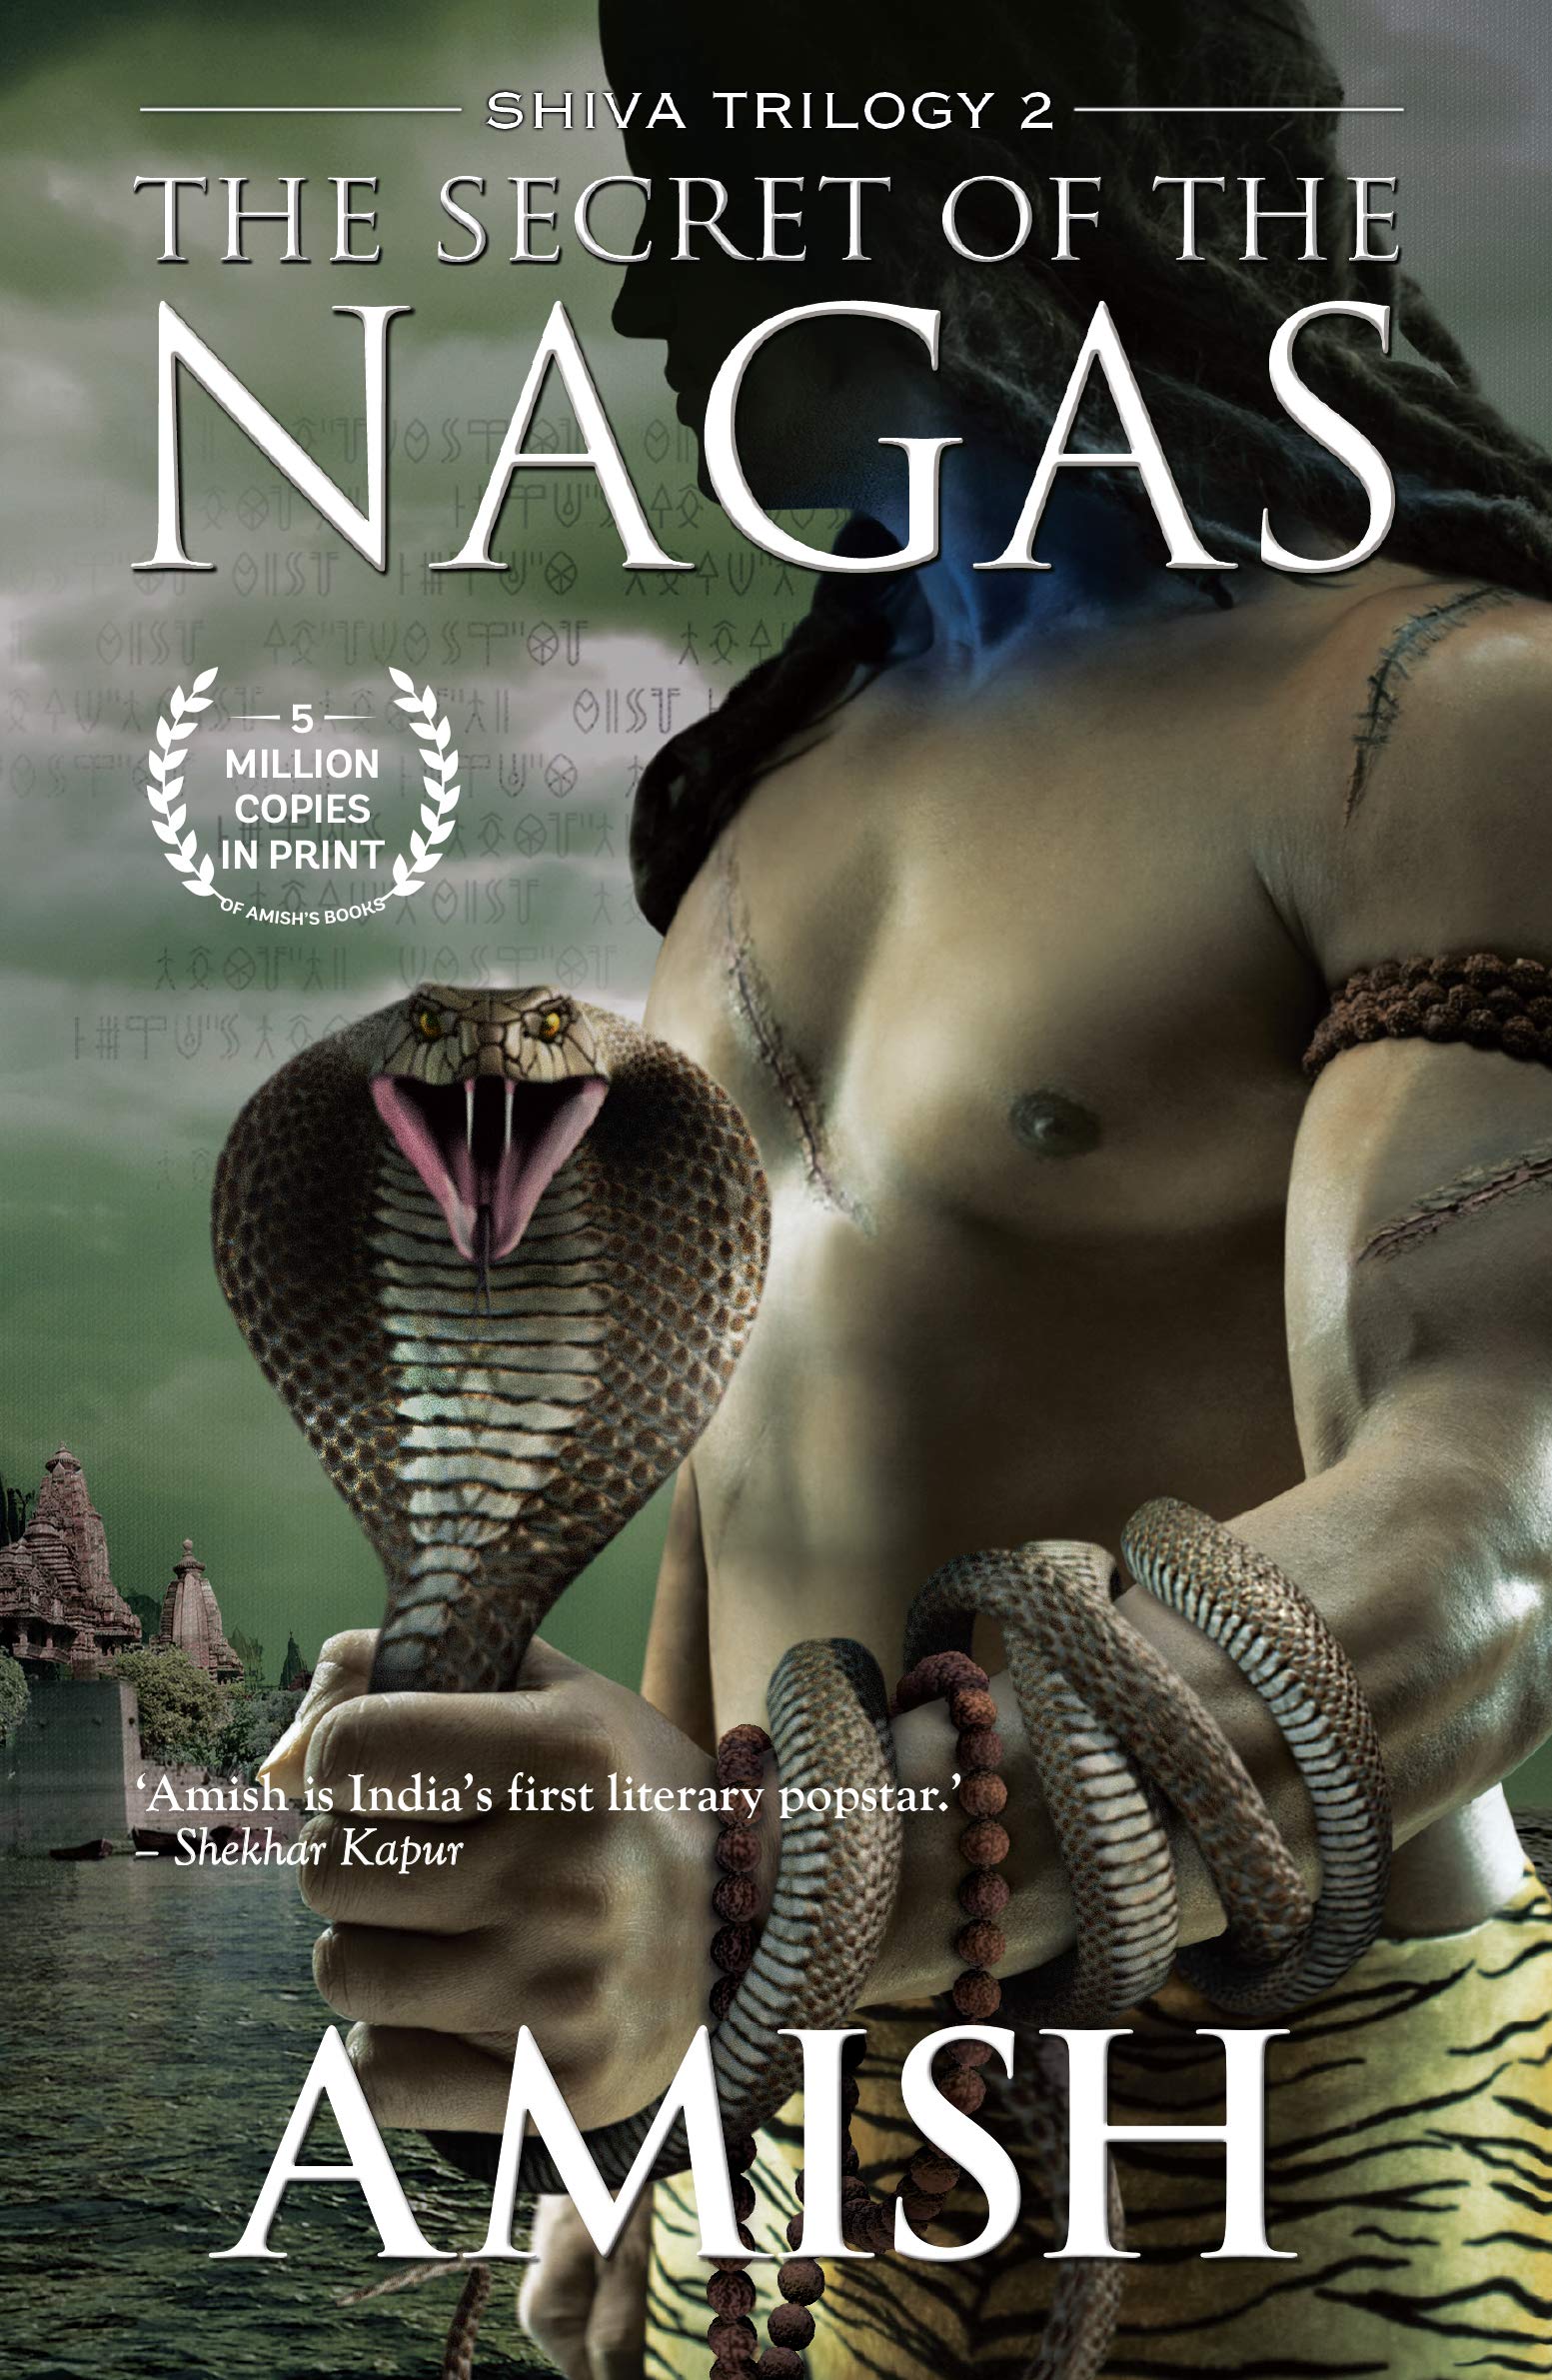 The Secret of the Nagas book by Amish Tripathi